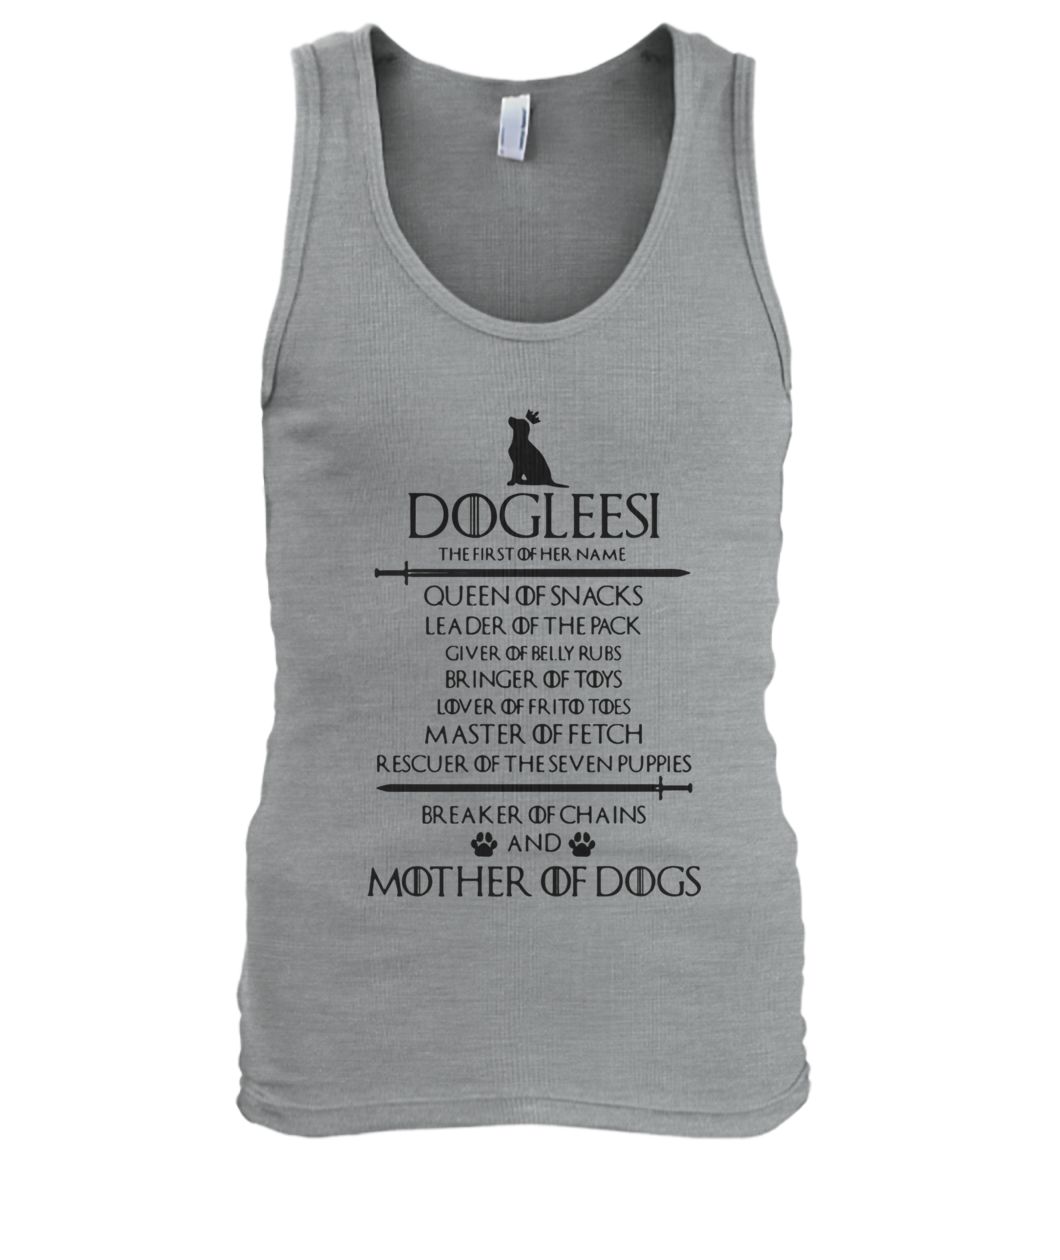 Game of thrones dogleesi the first of her name queen mother of dogs men's tank top